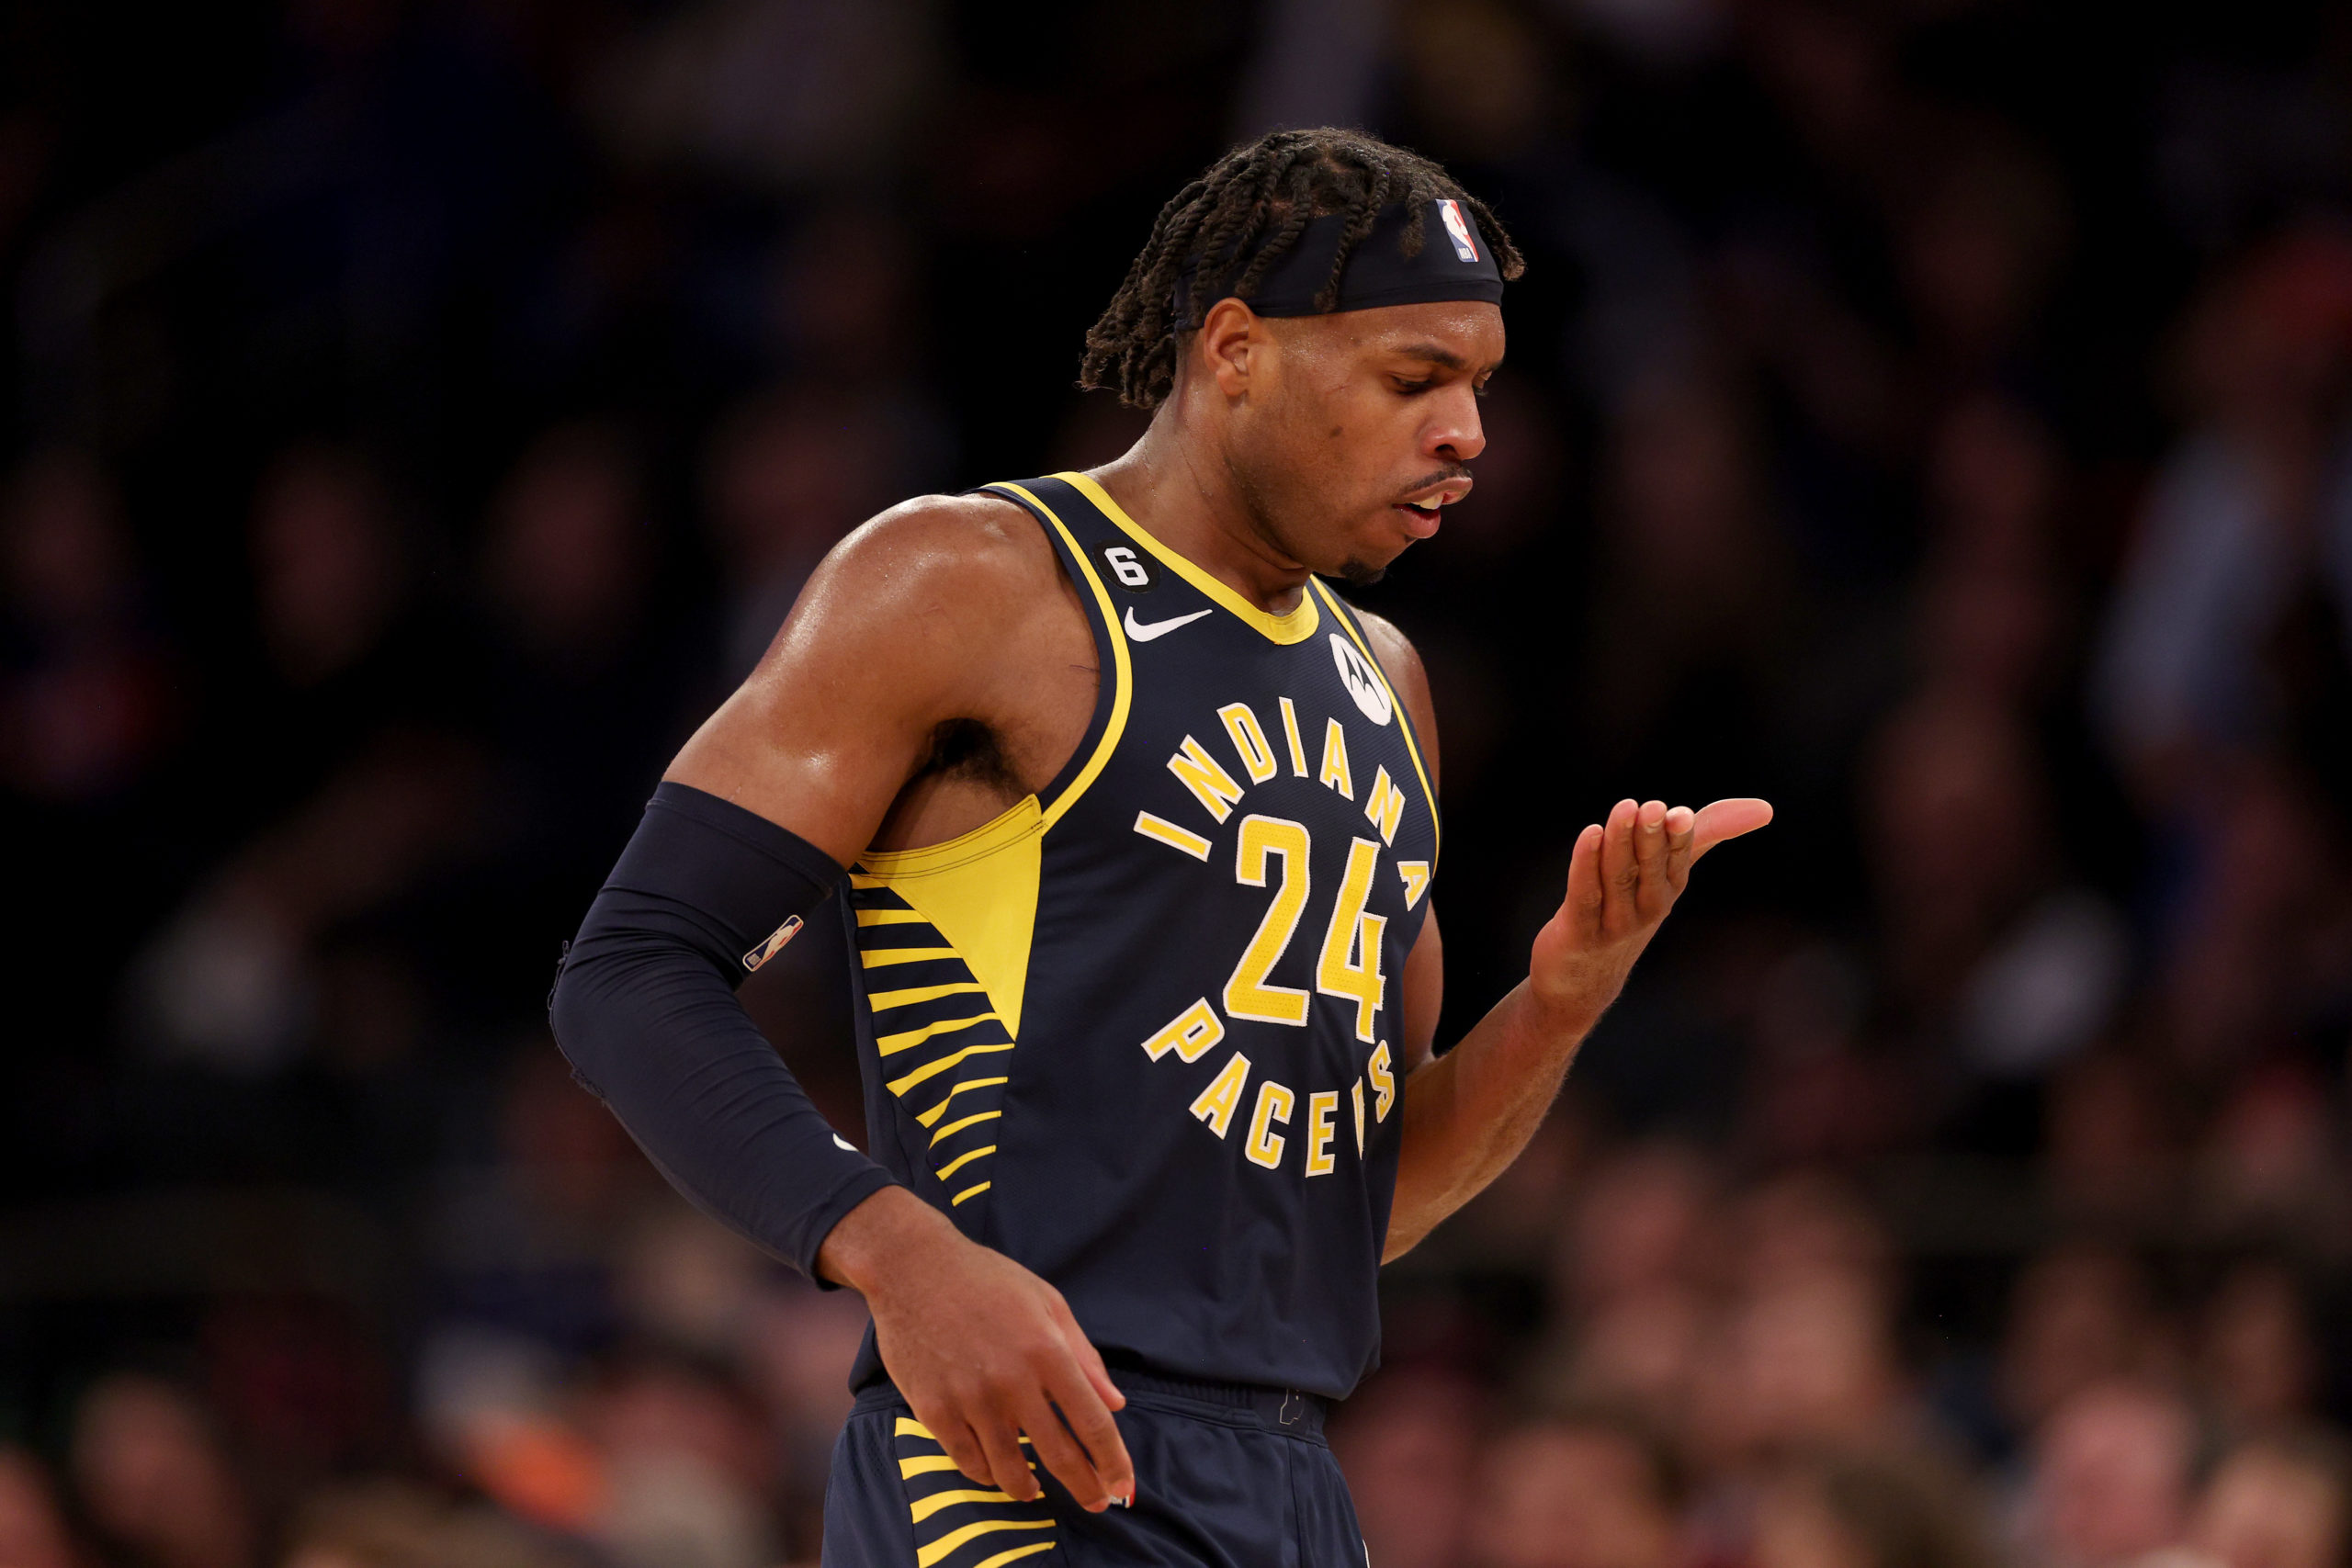 NEW YORK, NEW YORK - JANUARY 11: Buddy Hield #24 of the Indiana Pacers celebrates his three point shot in the fourth quarter against the New York Knicks at Madison Square Garden on January 11, 2023 in New York City. The New York Knicks defeated the Indiana Pacers 119-113. Elsa/Getty Images